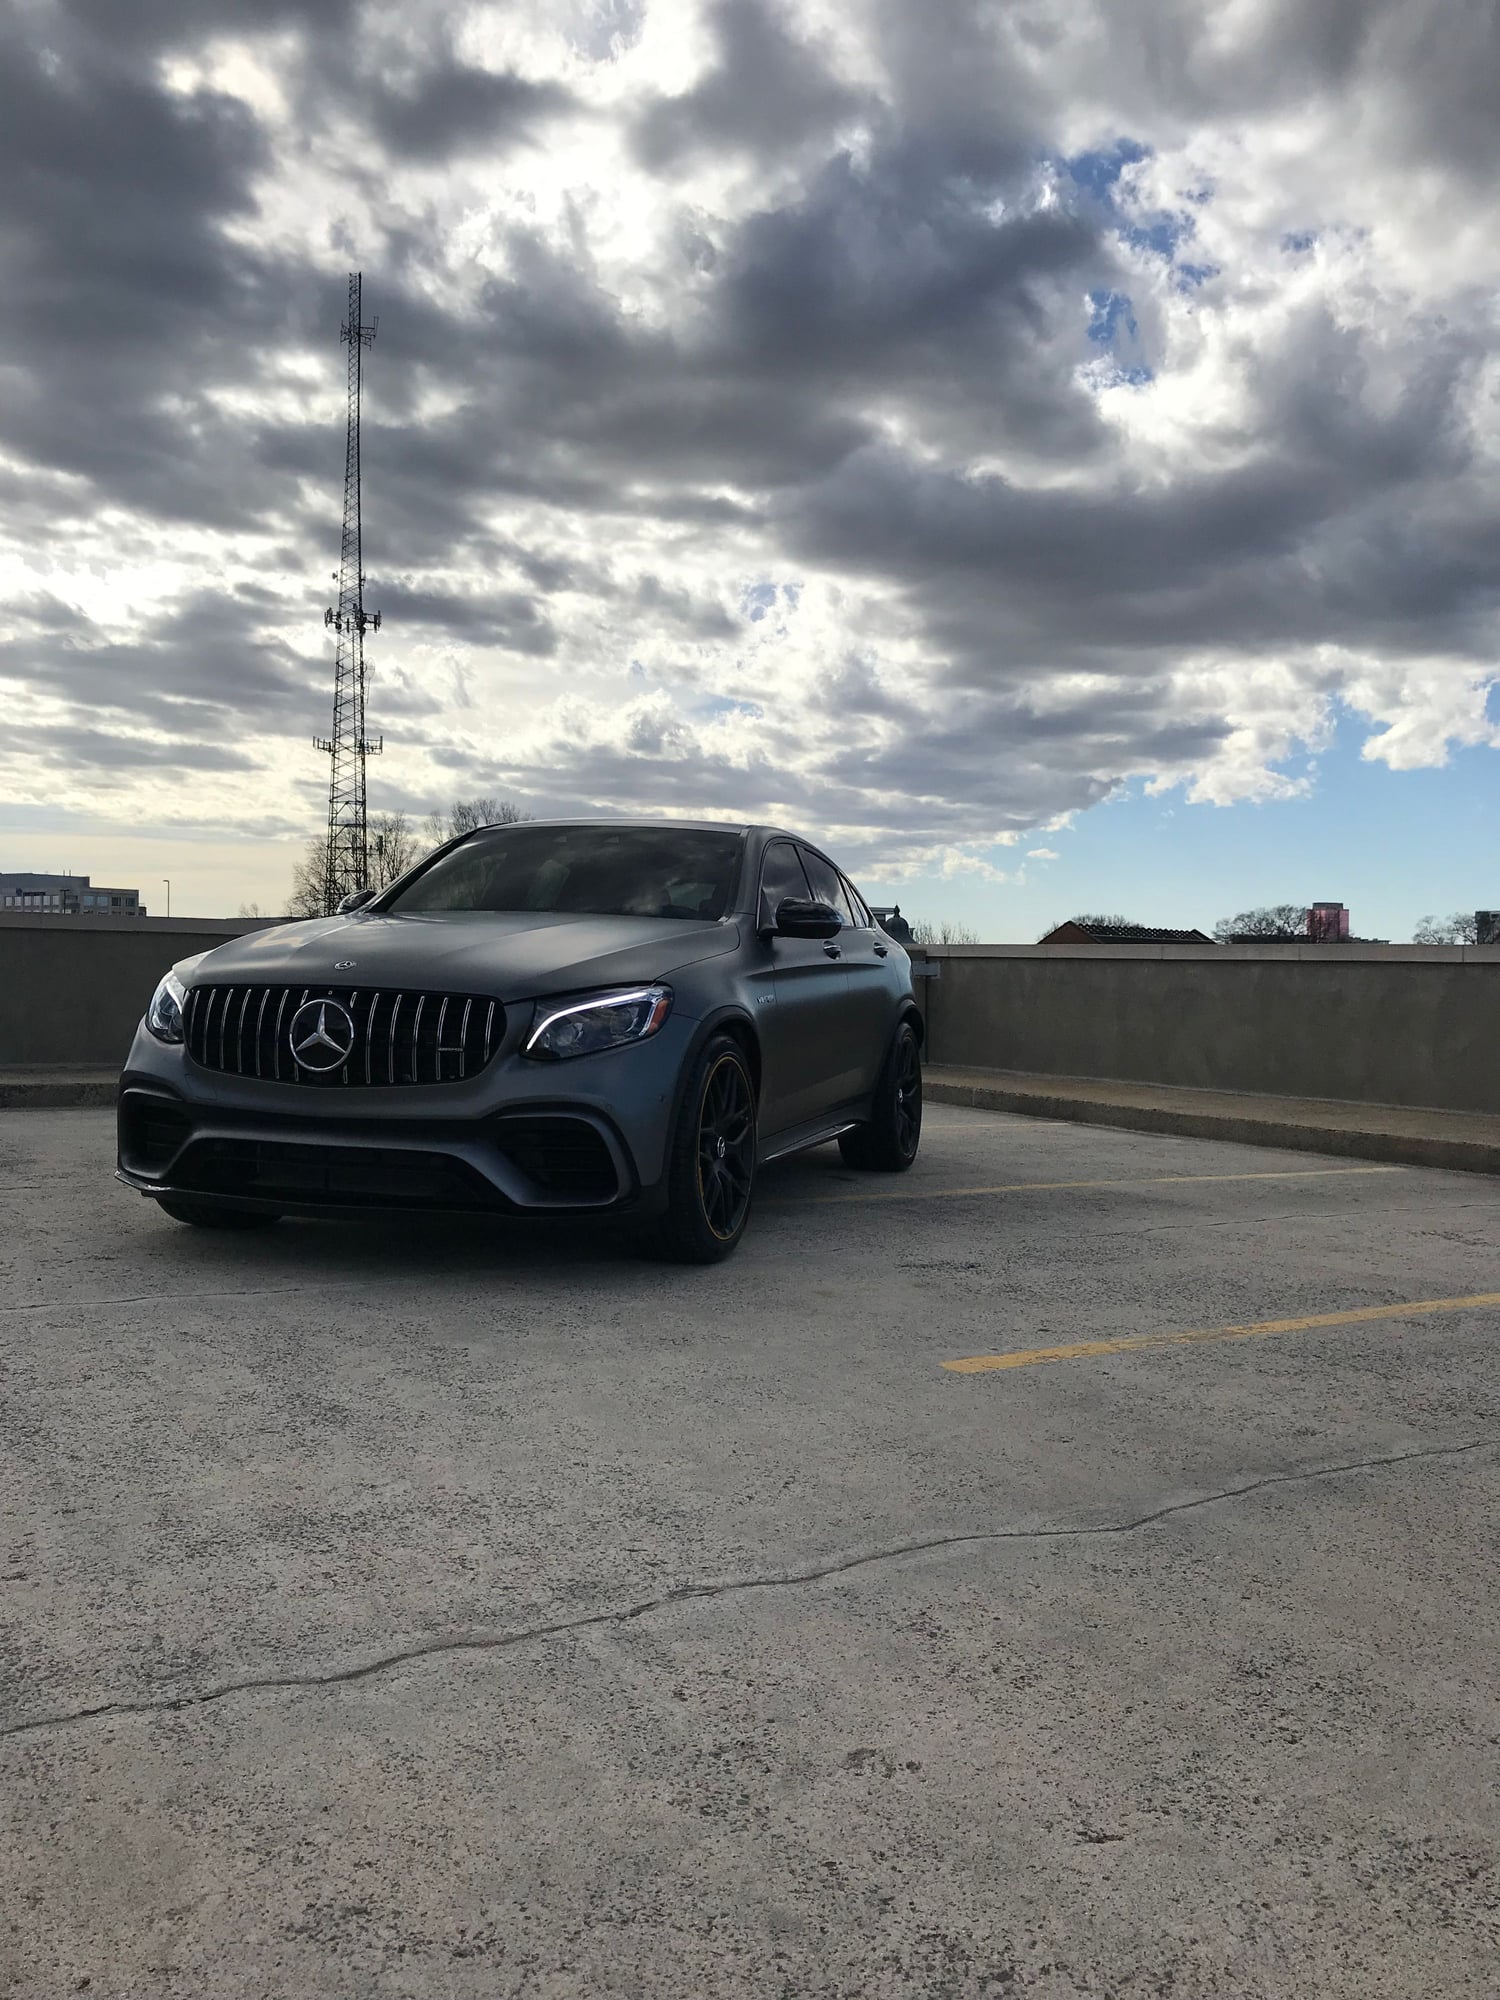 2018 Mercedes-Benz GLC63 AMG S - 2018 Mercedes-Benz AMG GLC 63 S COUPE EDITION 1 Less Than 2,000 Miles Ceramic Pro 9H - Used - VIN WDC0J8KB2JF466841 - 1,800 Miles - 8 cyl - AWD - Coupe - Gray - Charlotte, NC 28202, United States